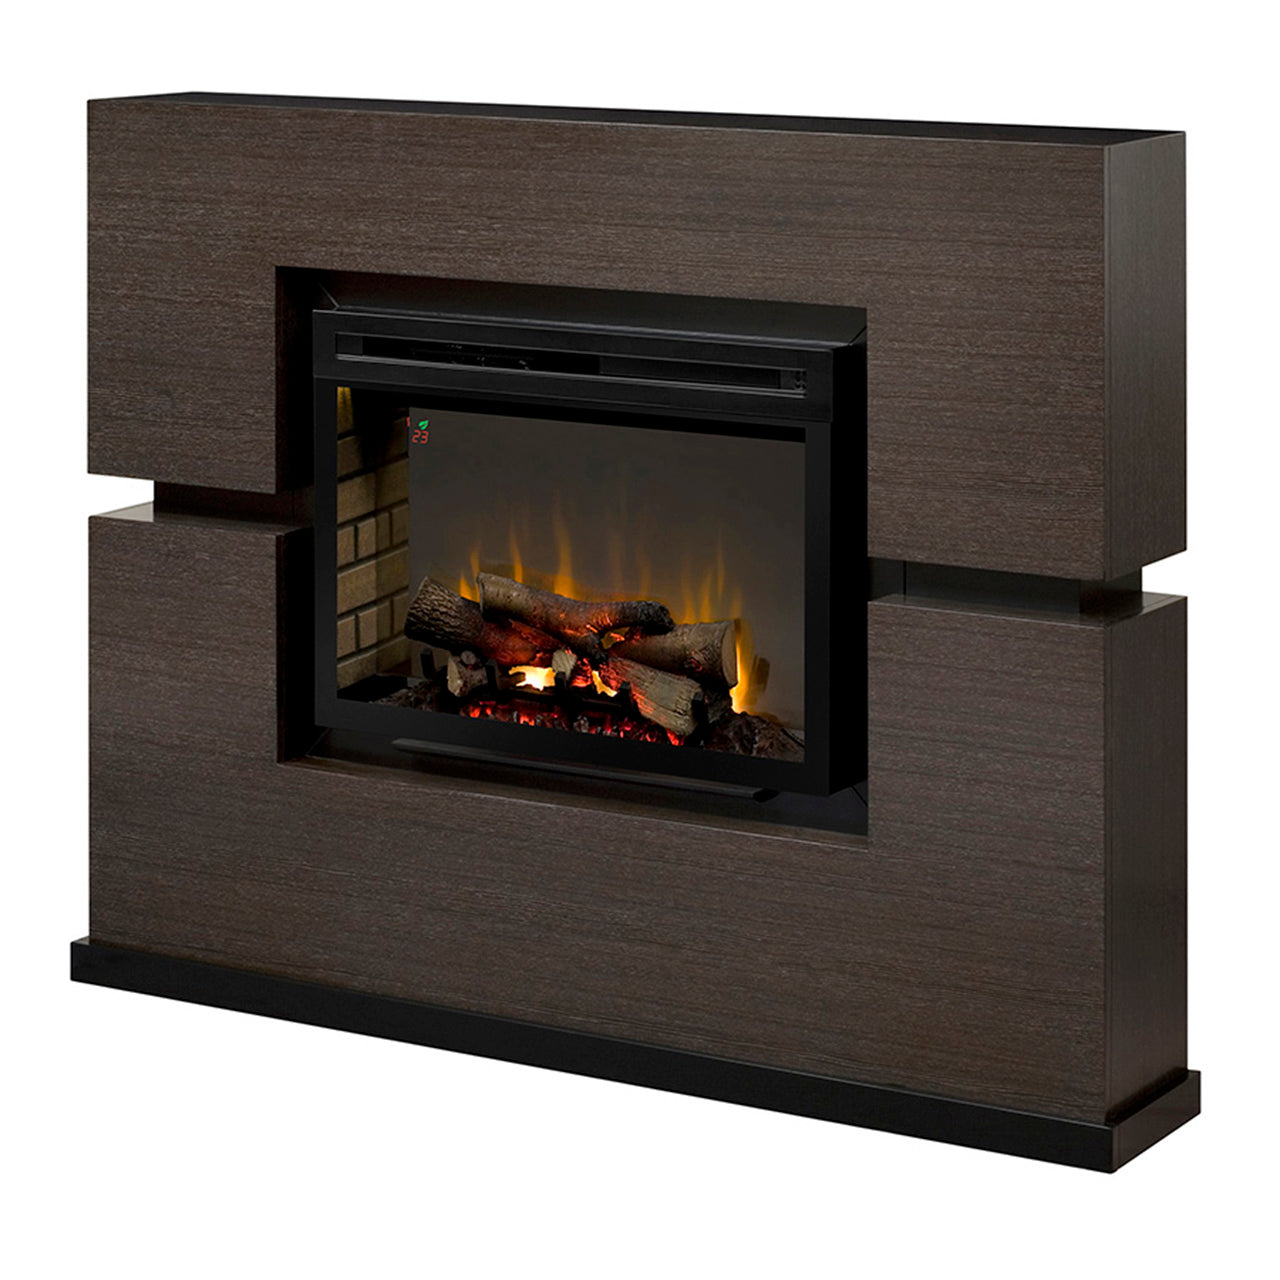 Linwood Grey Rift Electric Fireplace Mantel Package  - GDS33HL-1310RG - Fireplace Choice